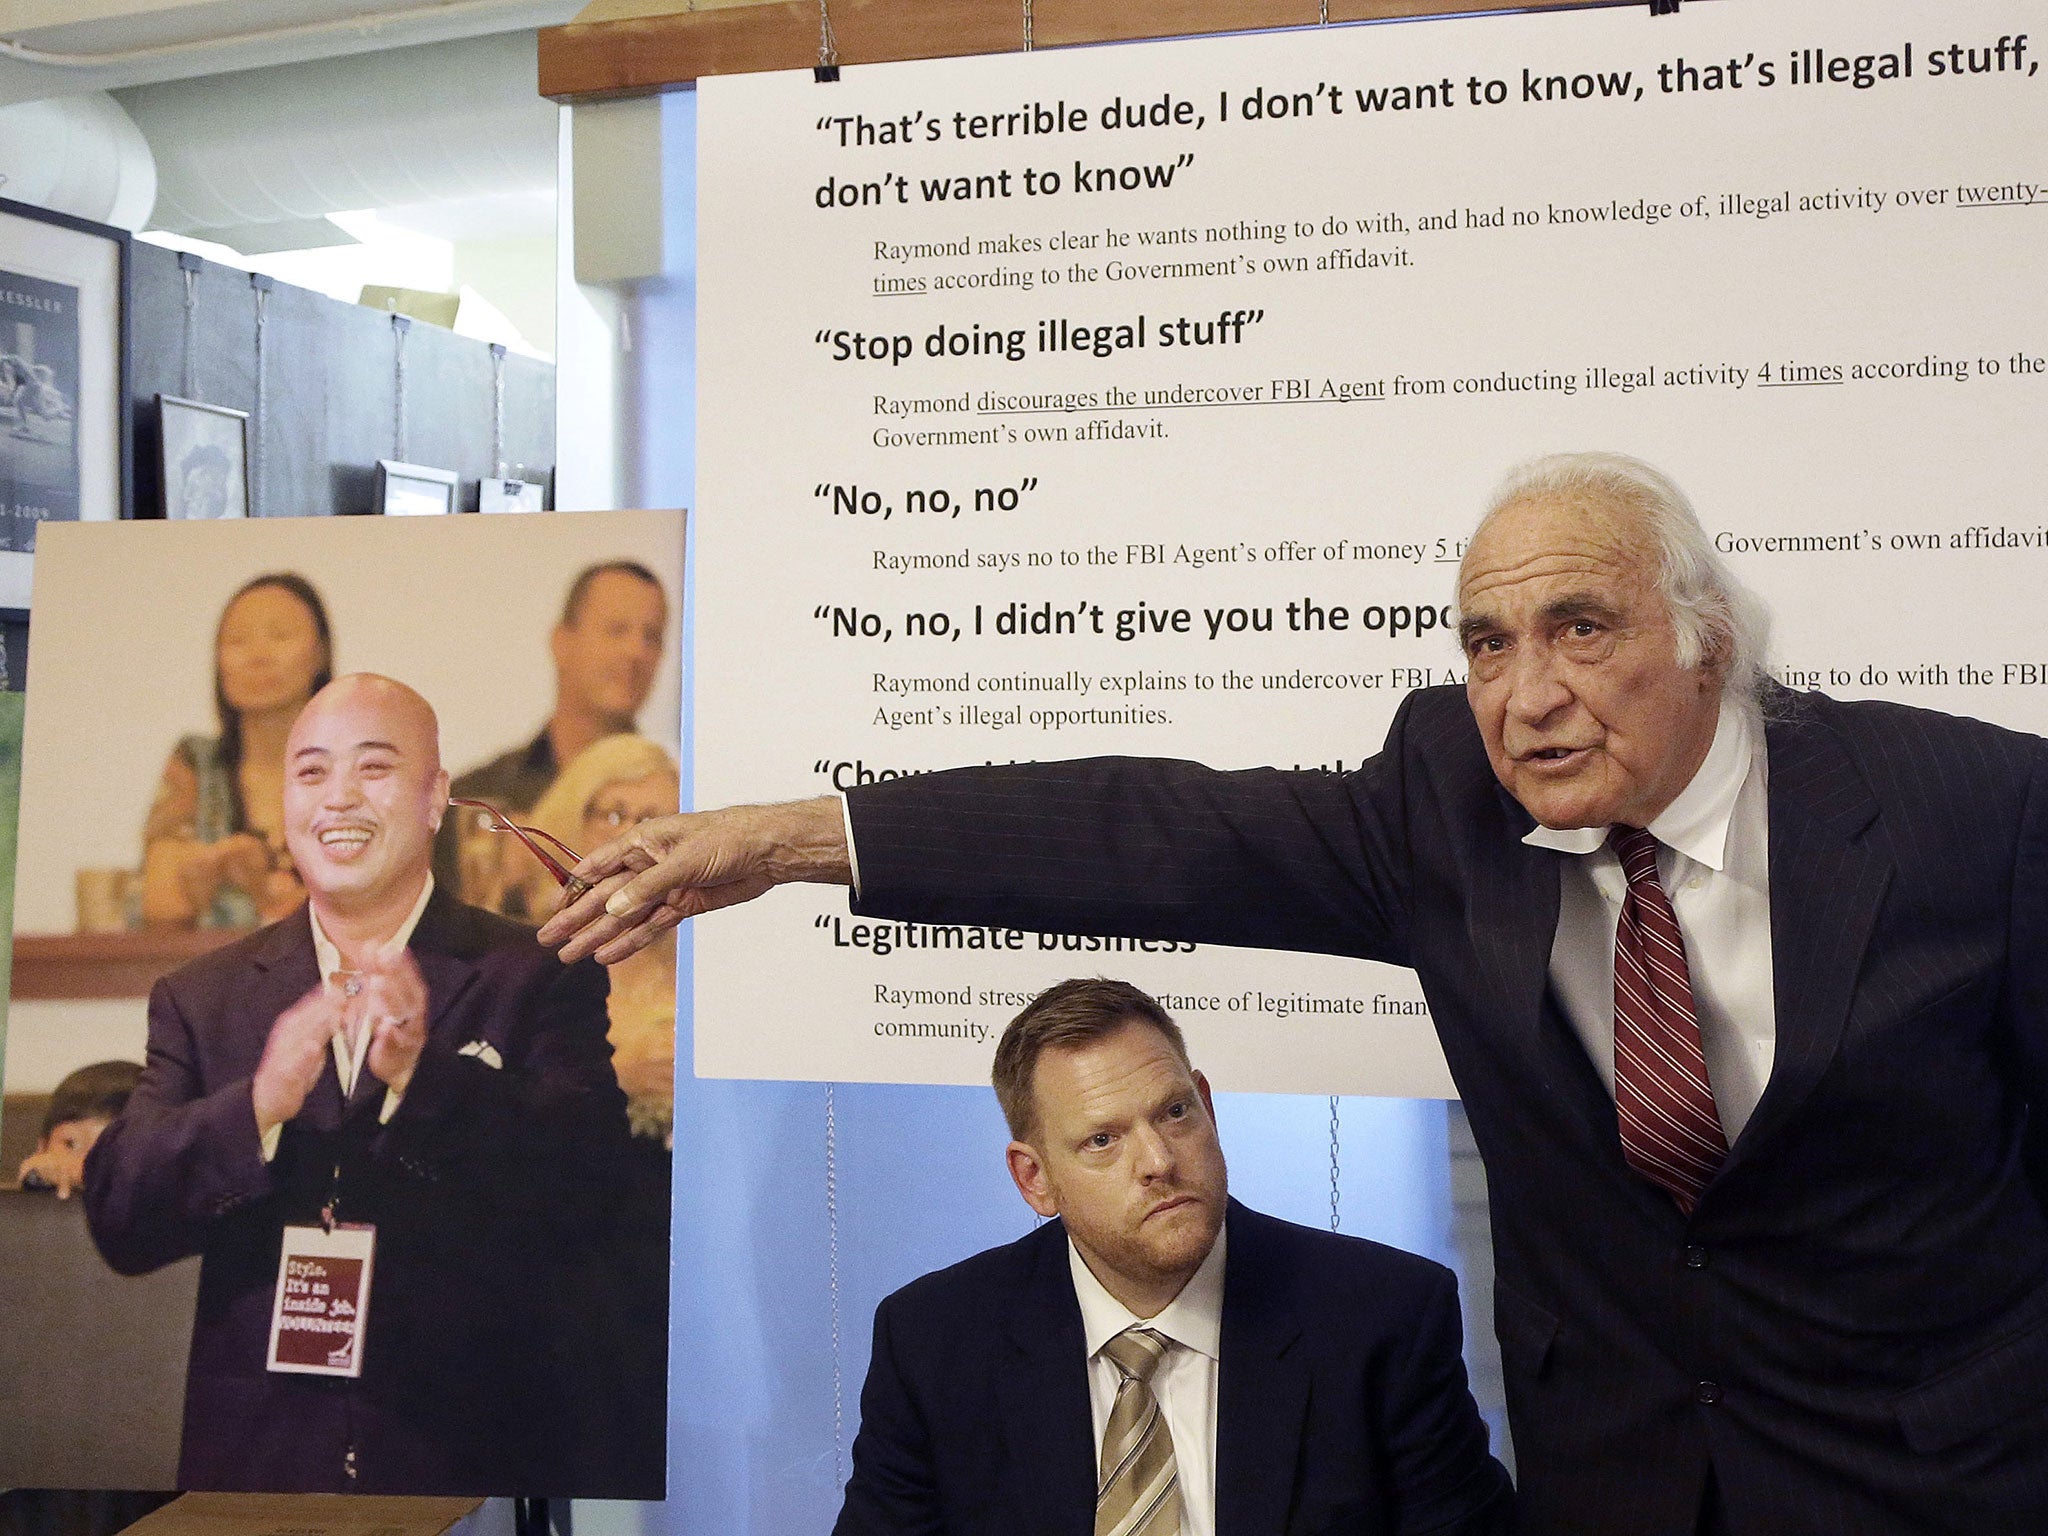 File: Tony Serra, right, speaks next to Curtis Briggs, both attorneys for Raymond 'Shrimp Boy' Chow, pictured at left, during a news conference in San Francisco on 10 April, 2014